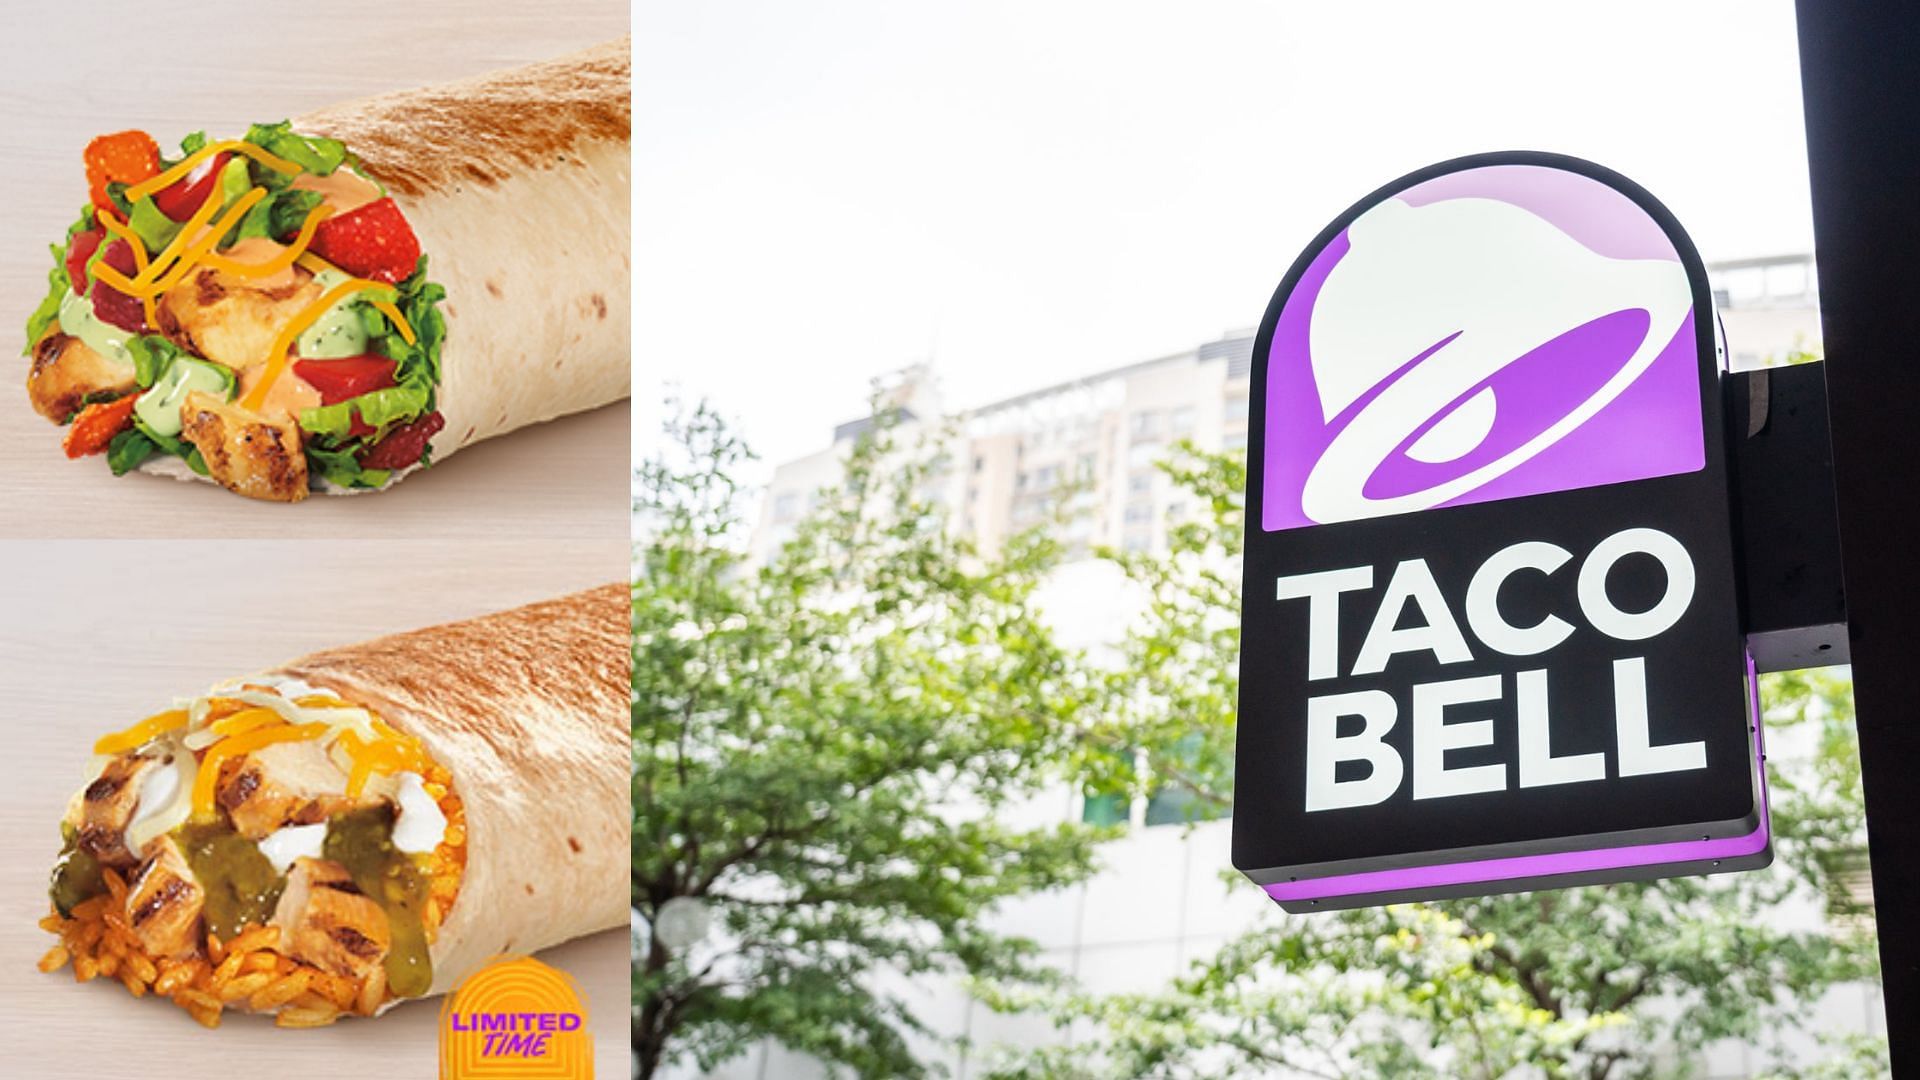 Taco Bell is testing limited time $2 burritos (Image via Taco Bell/SOPA Images/Getty Images)